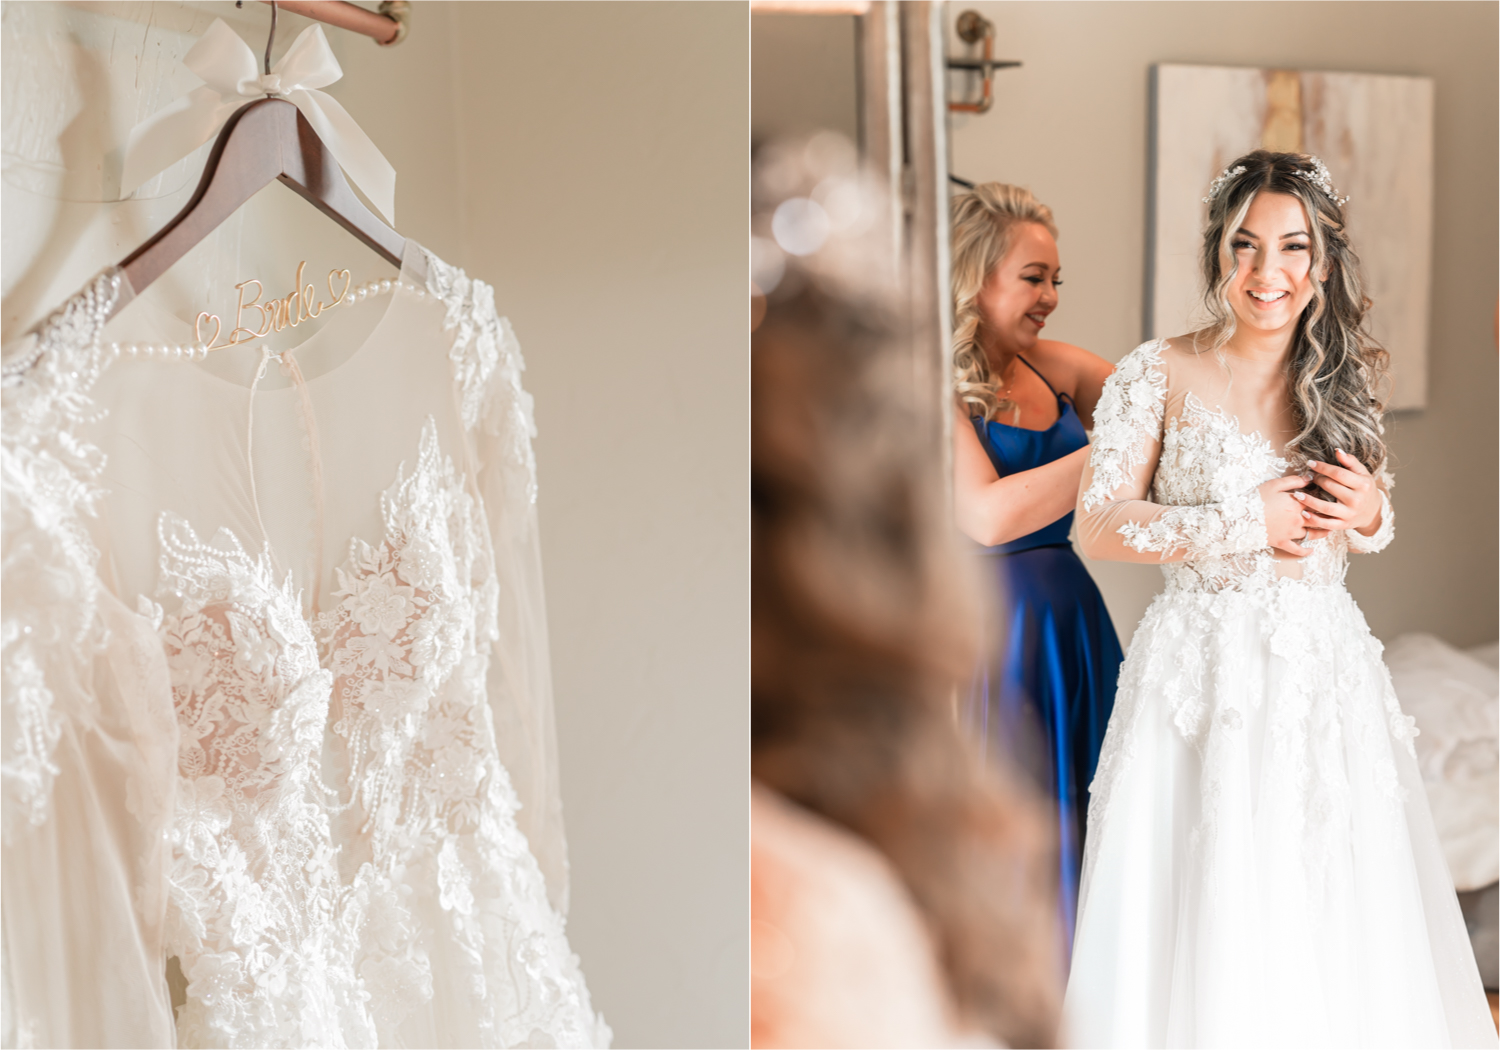 Romantic and Rustic Wedding at The Mill in Windsor | Britni Girard Photography | Colorado based wedding photography and videography team | Bride Portraits | Bride's Dress from Madeira Wedding in Kiev Ukraine | Bridal House at The Mill 